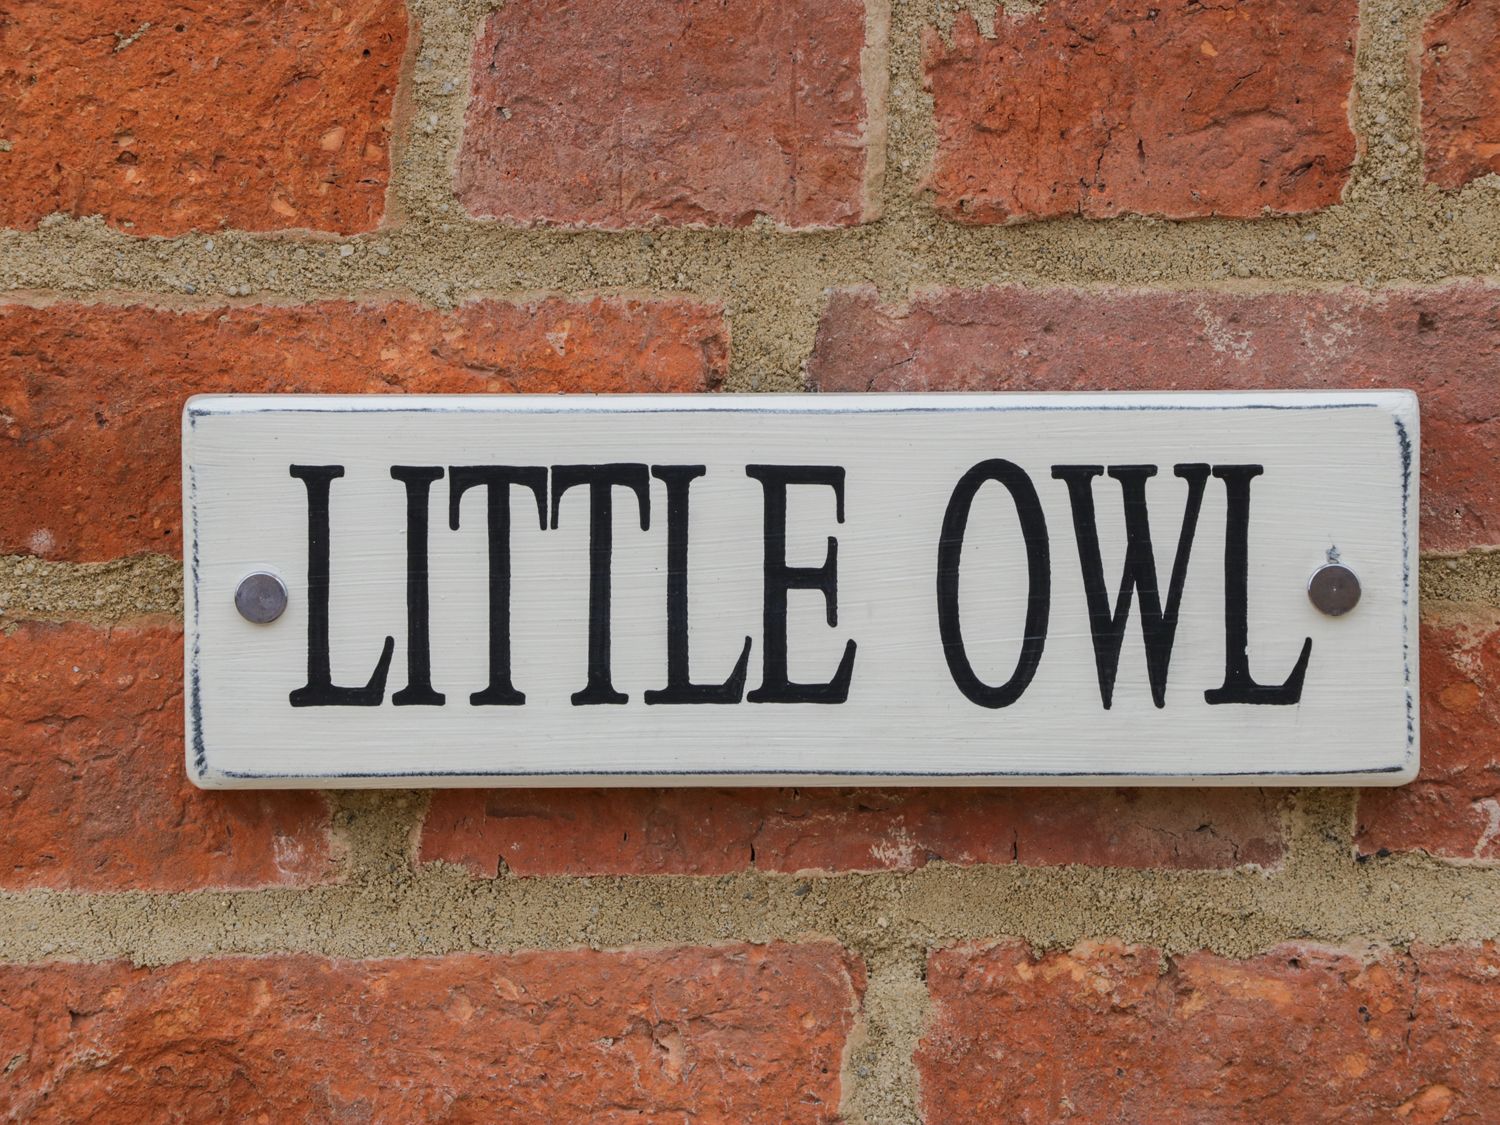 Little Owl, Lincolnshire